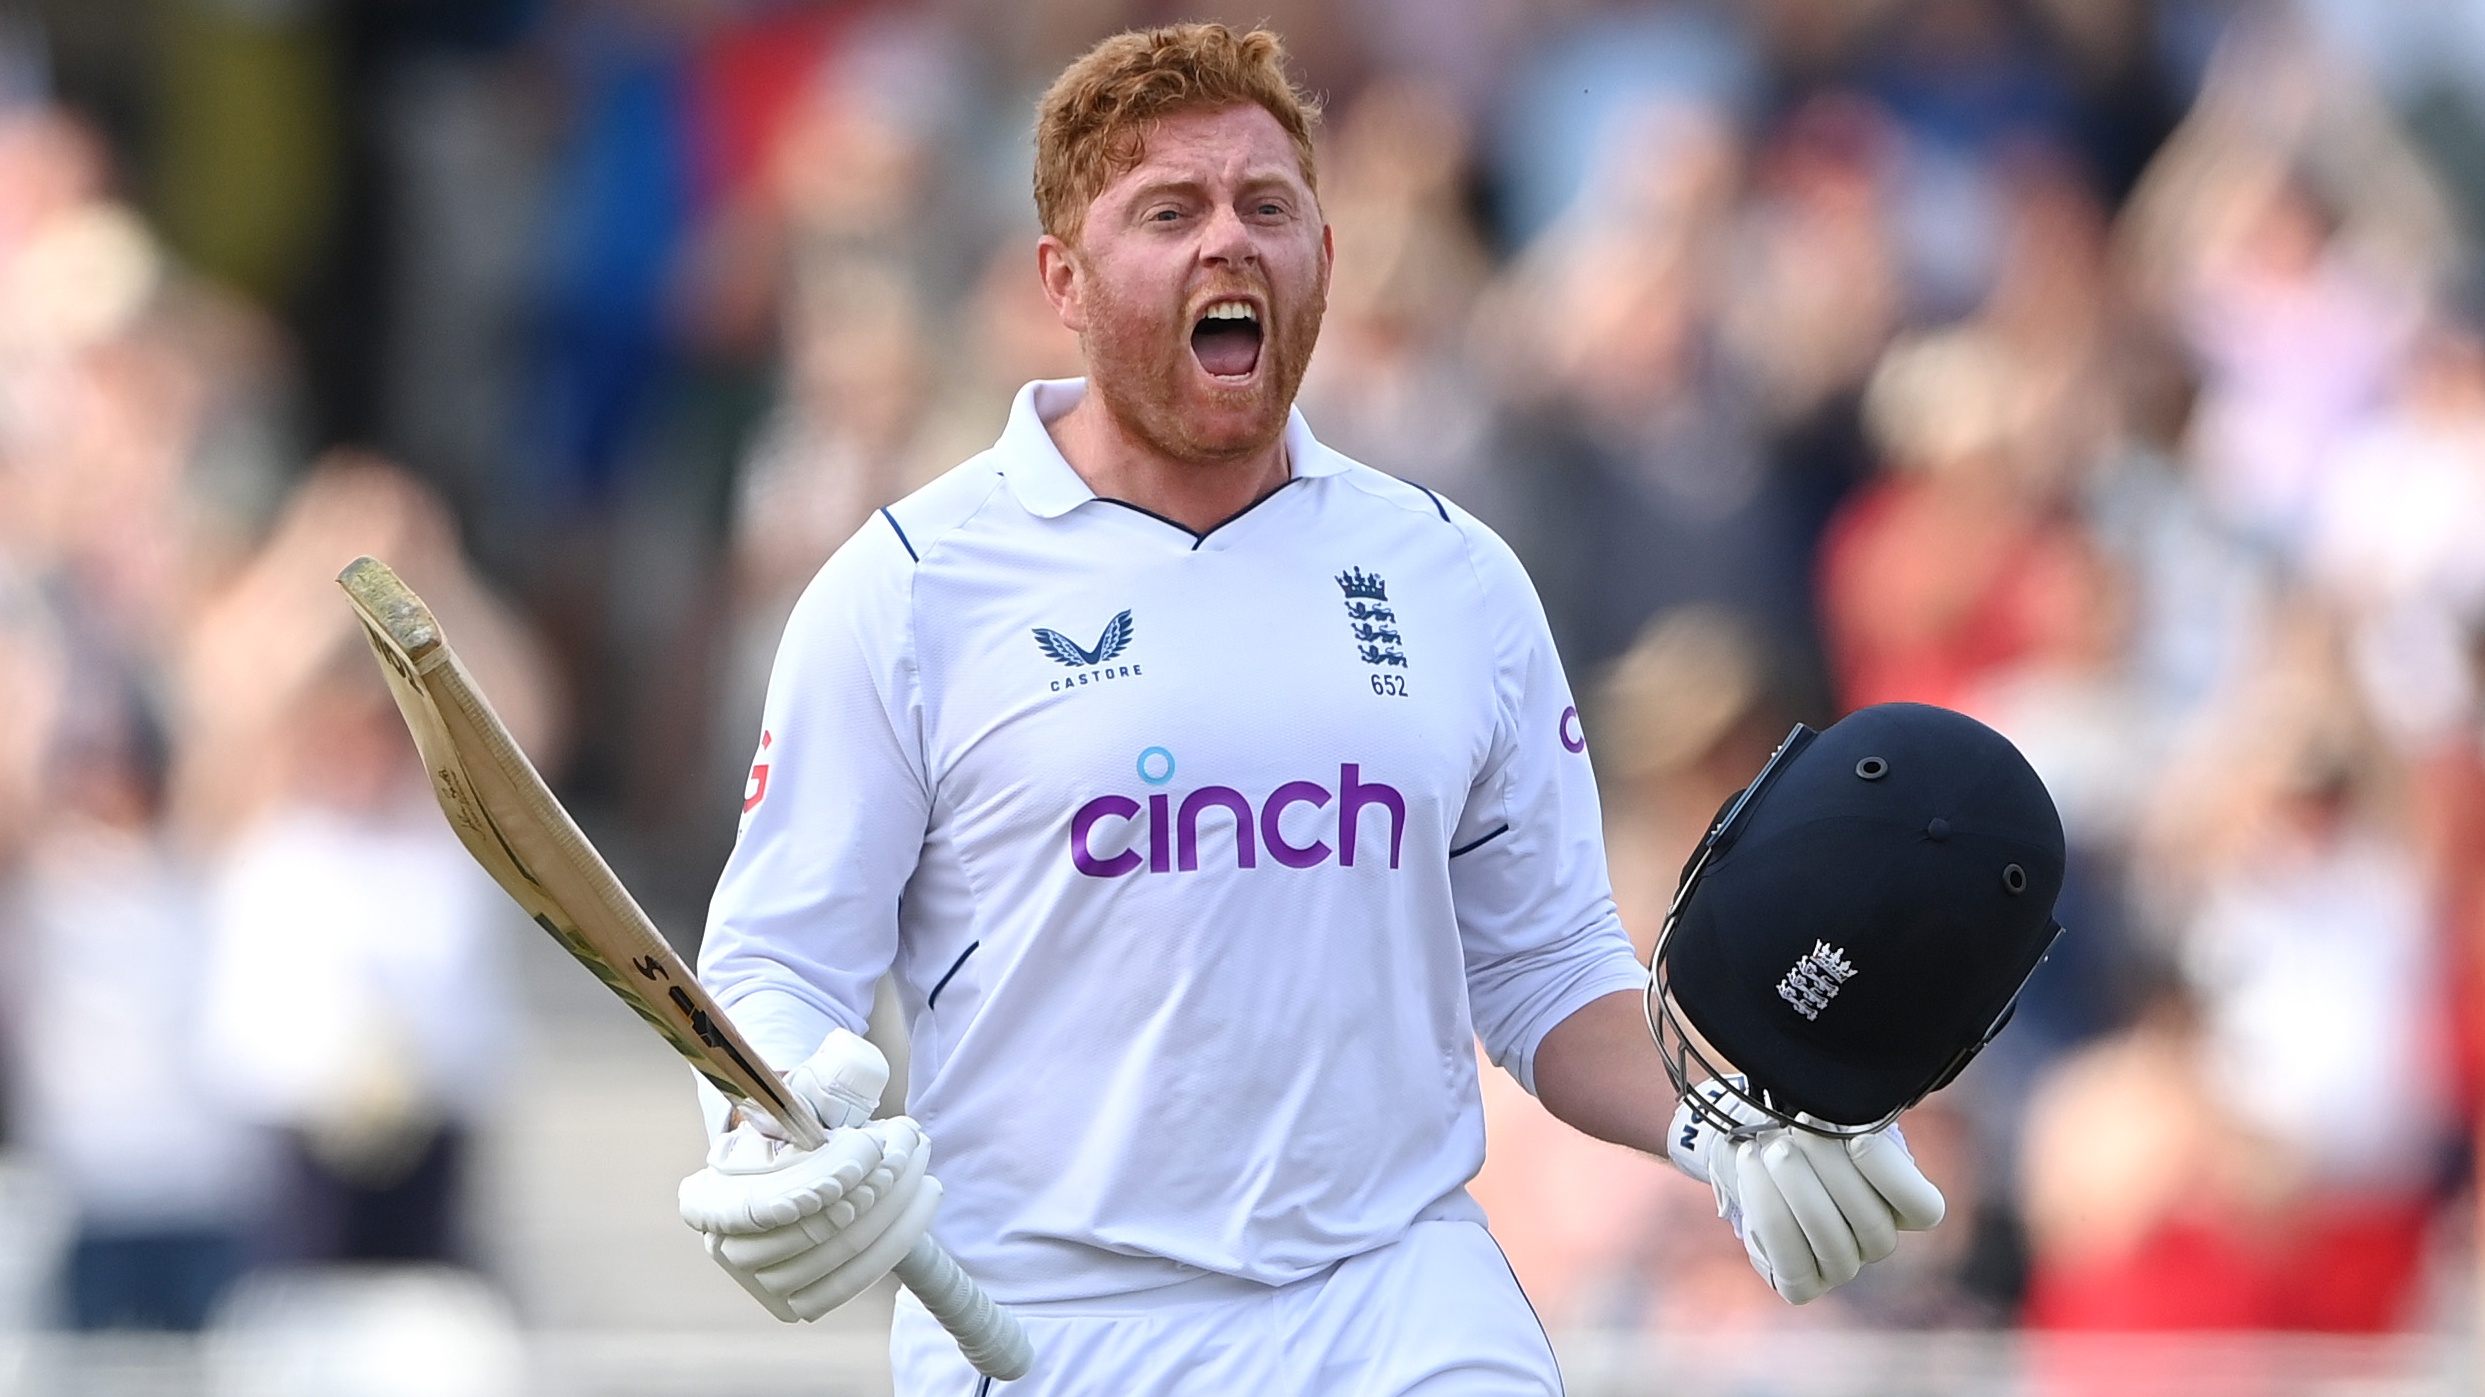 New Zealand vs England live stream and watch 2nd Test online from anywhere TechRadar